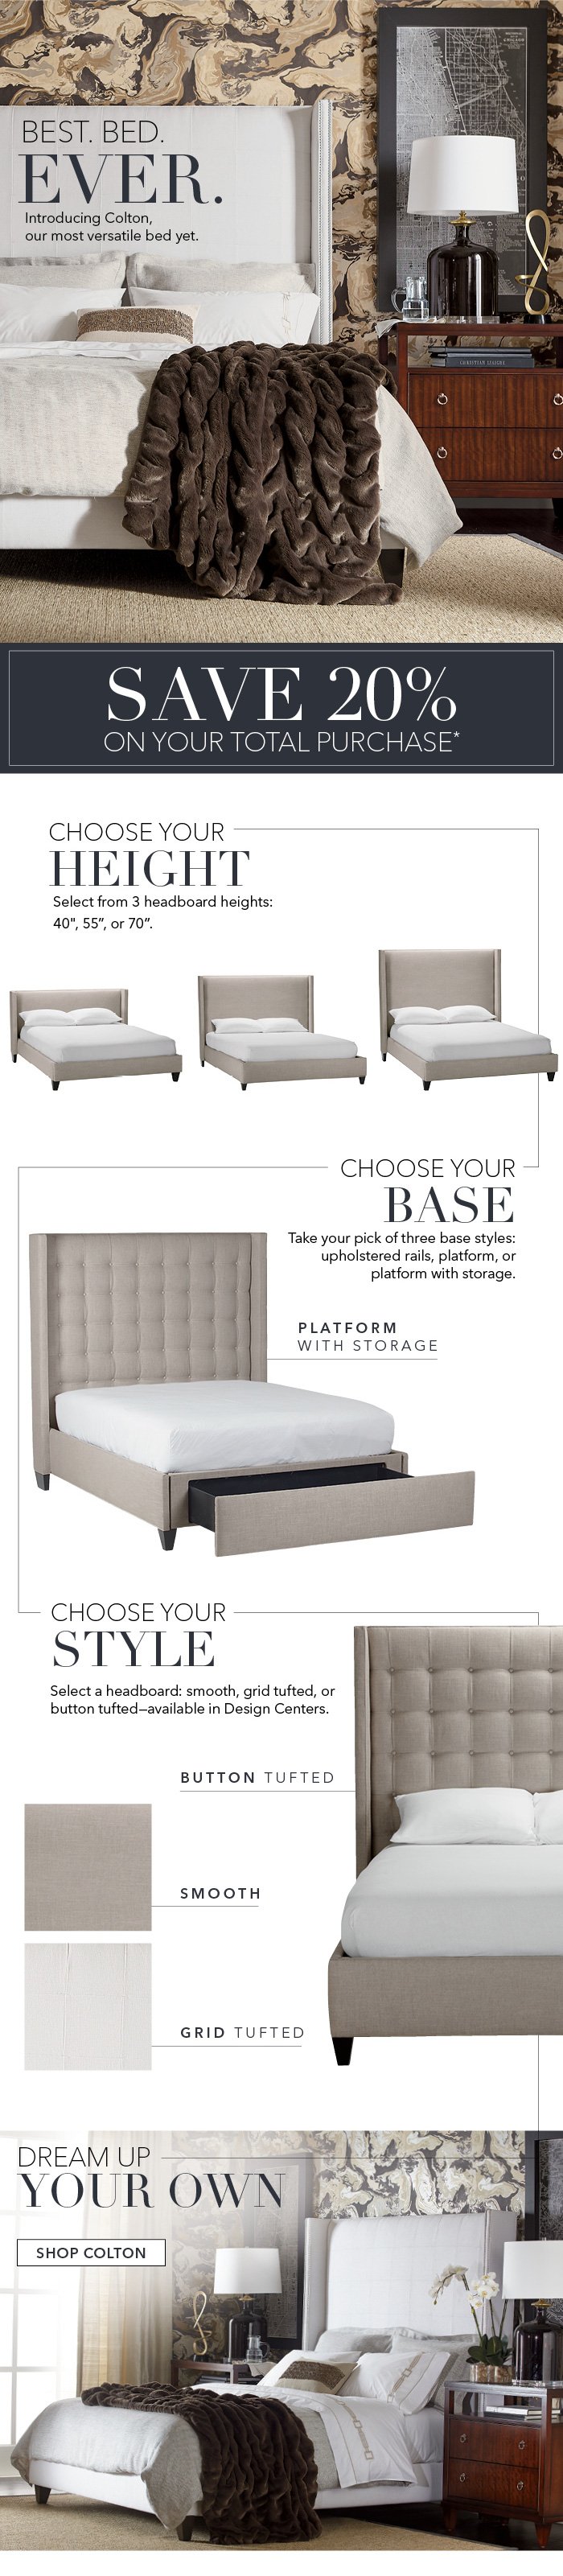 Introducing the new Colton bed. Also, save 20% on your total purchase*